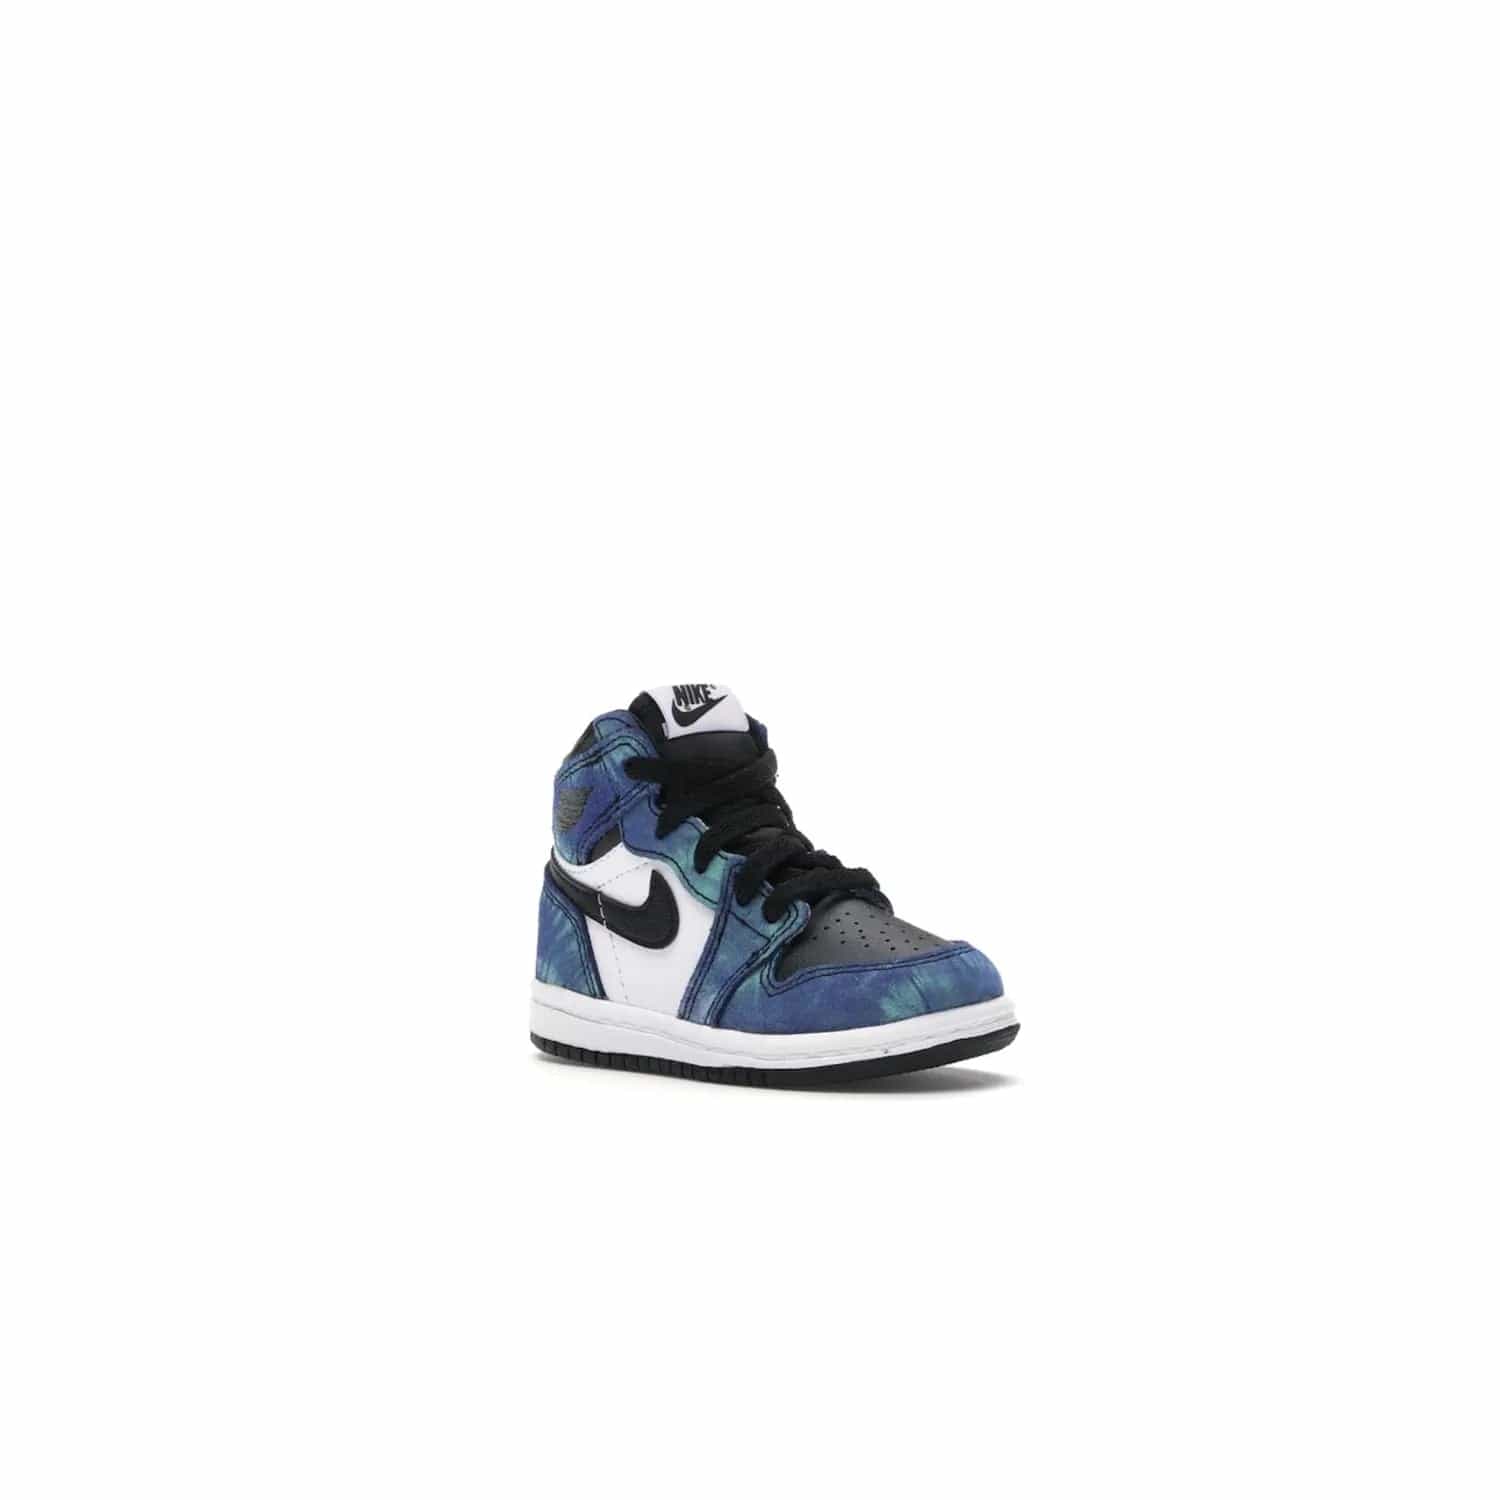 Jordan 1 Retro High Tie Dye (TD) - Image 5 - Only at www.BallersClubKickz.com - Add a unique twist to your sneaker collection with the Jordan 1 Retro High Tie Dye (TD). Classic Air Jordan 1 details like toe box perforations and the signature Swoosh logo on the sidewall are topped with an eye-catching tie dye design that’s perfect for styling all year round.